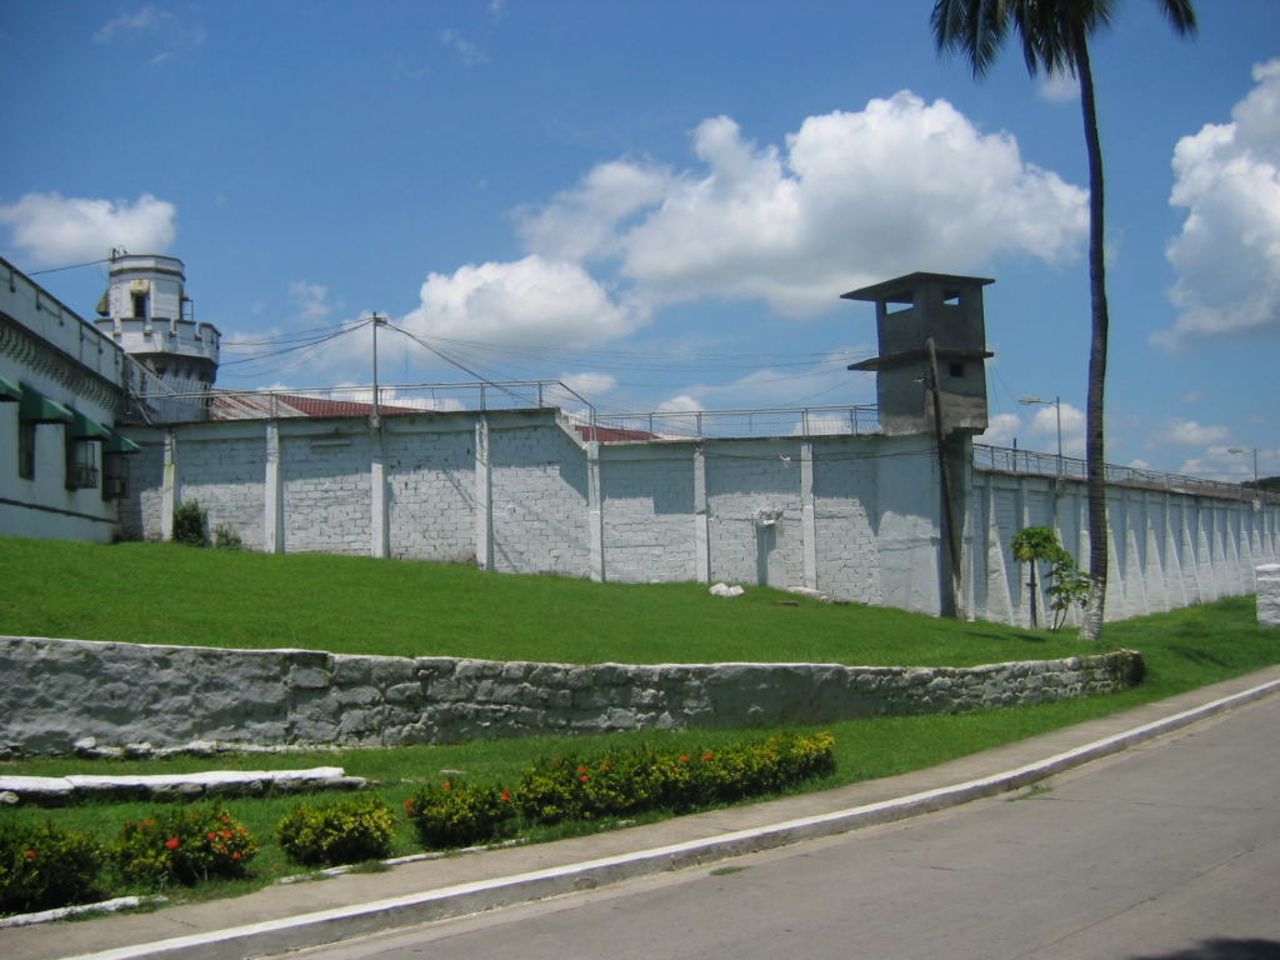 New Bilibid Prison (NBP), on the outskirts of Manila, was built decades ago for a maximum 5,500 inmates. Now more than 14,200 prisoners live there, crammed together in cells and outnumbering prison guards by a staggering 80:1. 